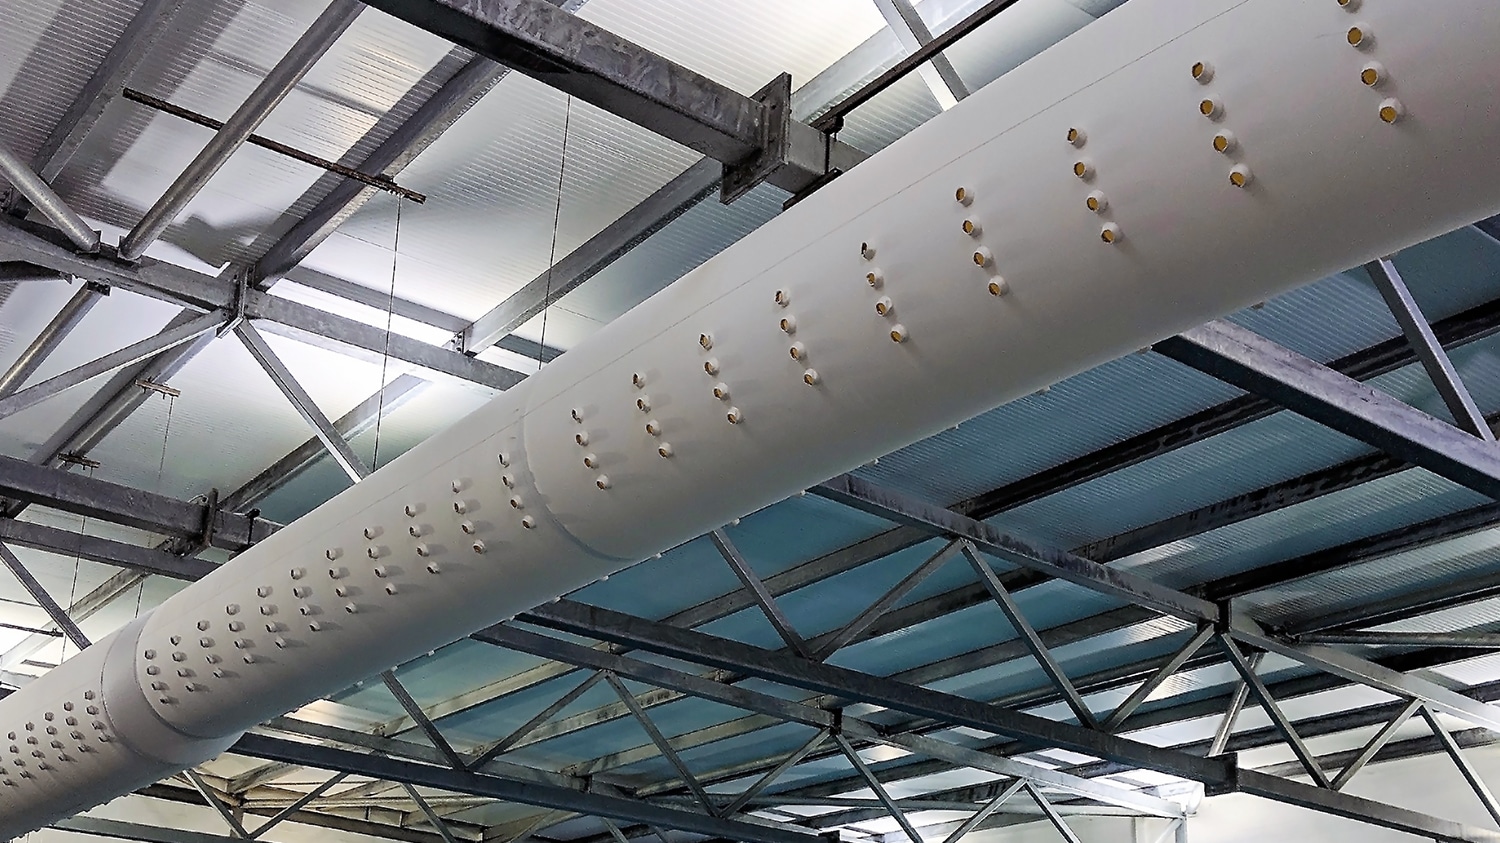 Fire-resistant fabric duct with nozzles